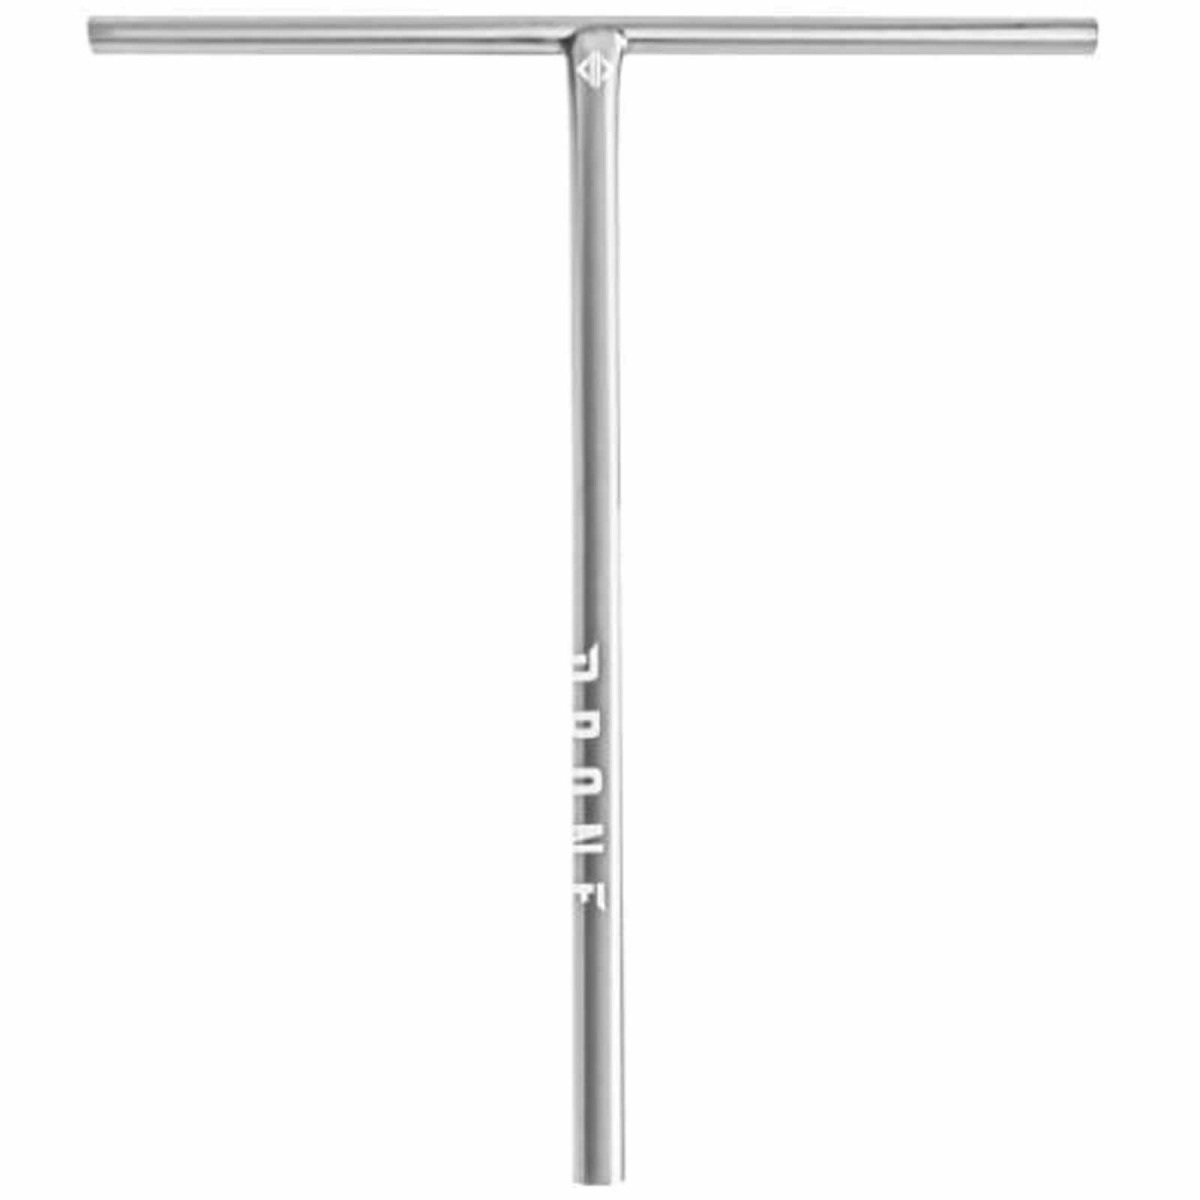 An image of Drone Relic 2 SCS / IHC Scooter T Bars - Polished Silver Chrome – 710mm x 600m...